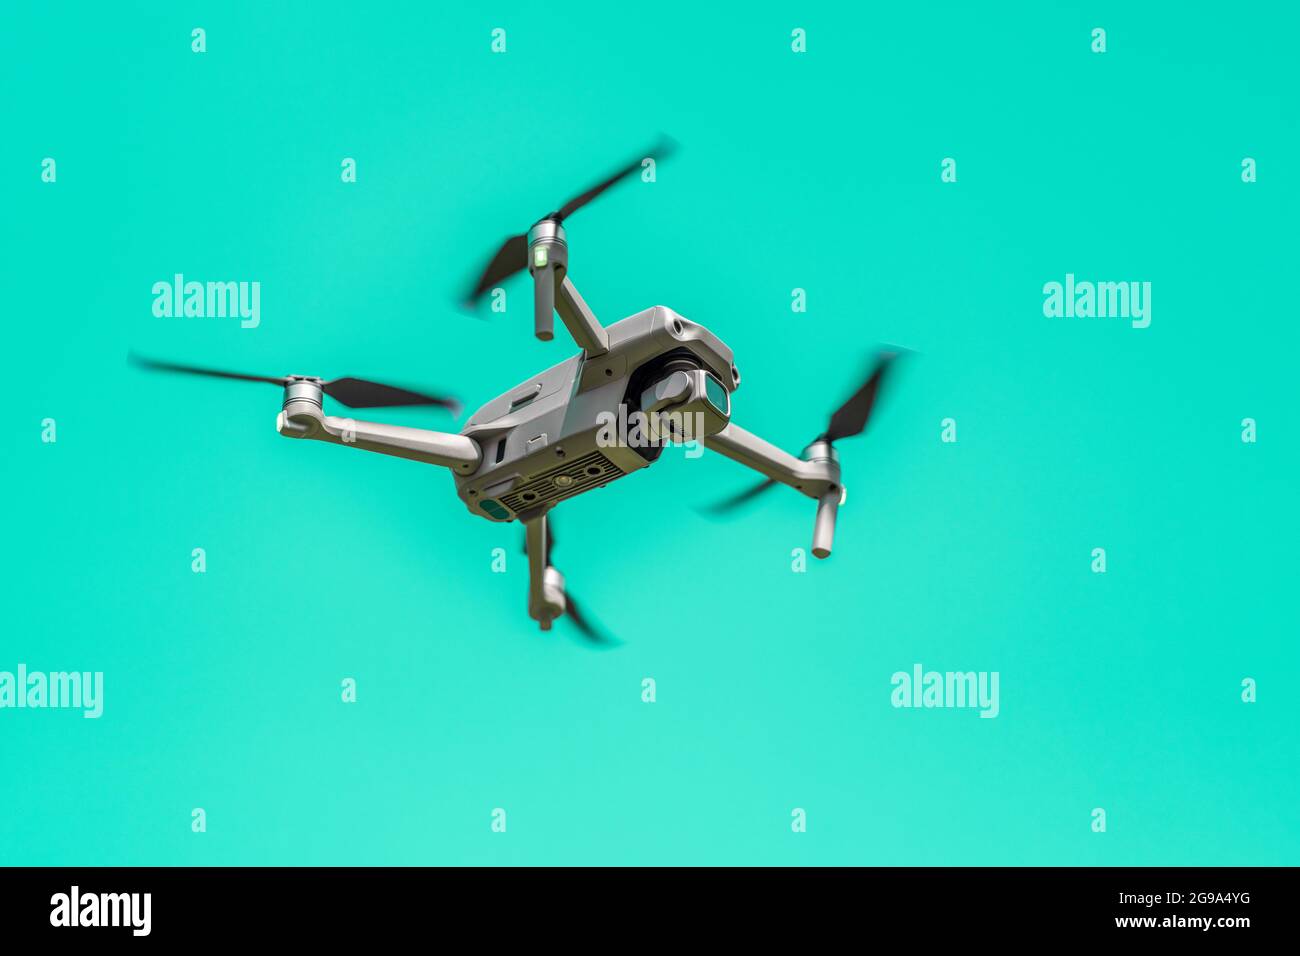 Flying drone with camera on turquoise background with copy space. Airborne quadcopter. Also known as a drone or UAV, Unmanned Aerial Vehicle. Low angl Stock Photo